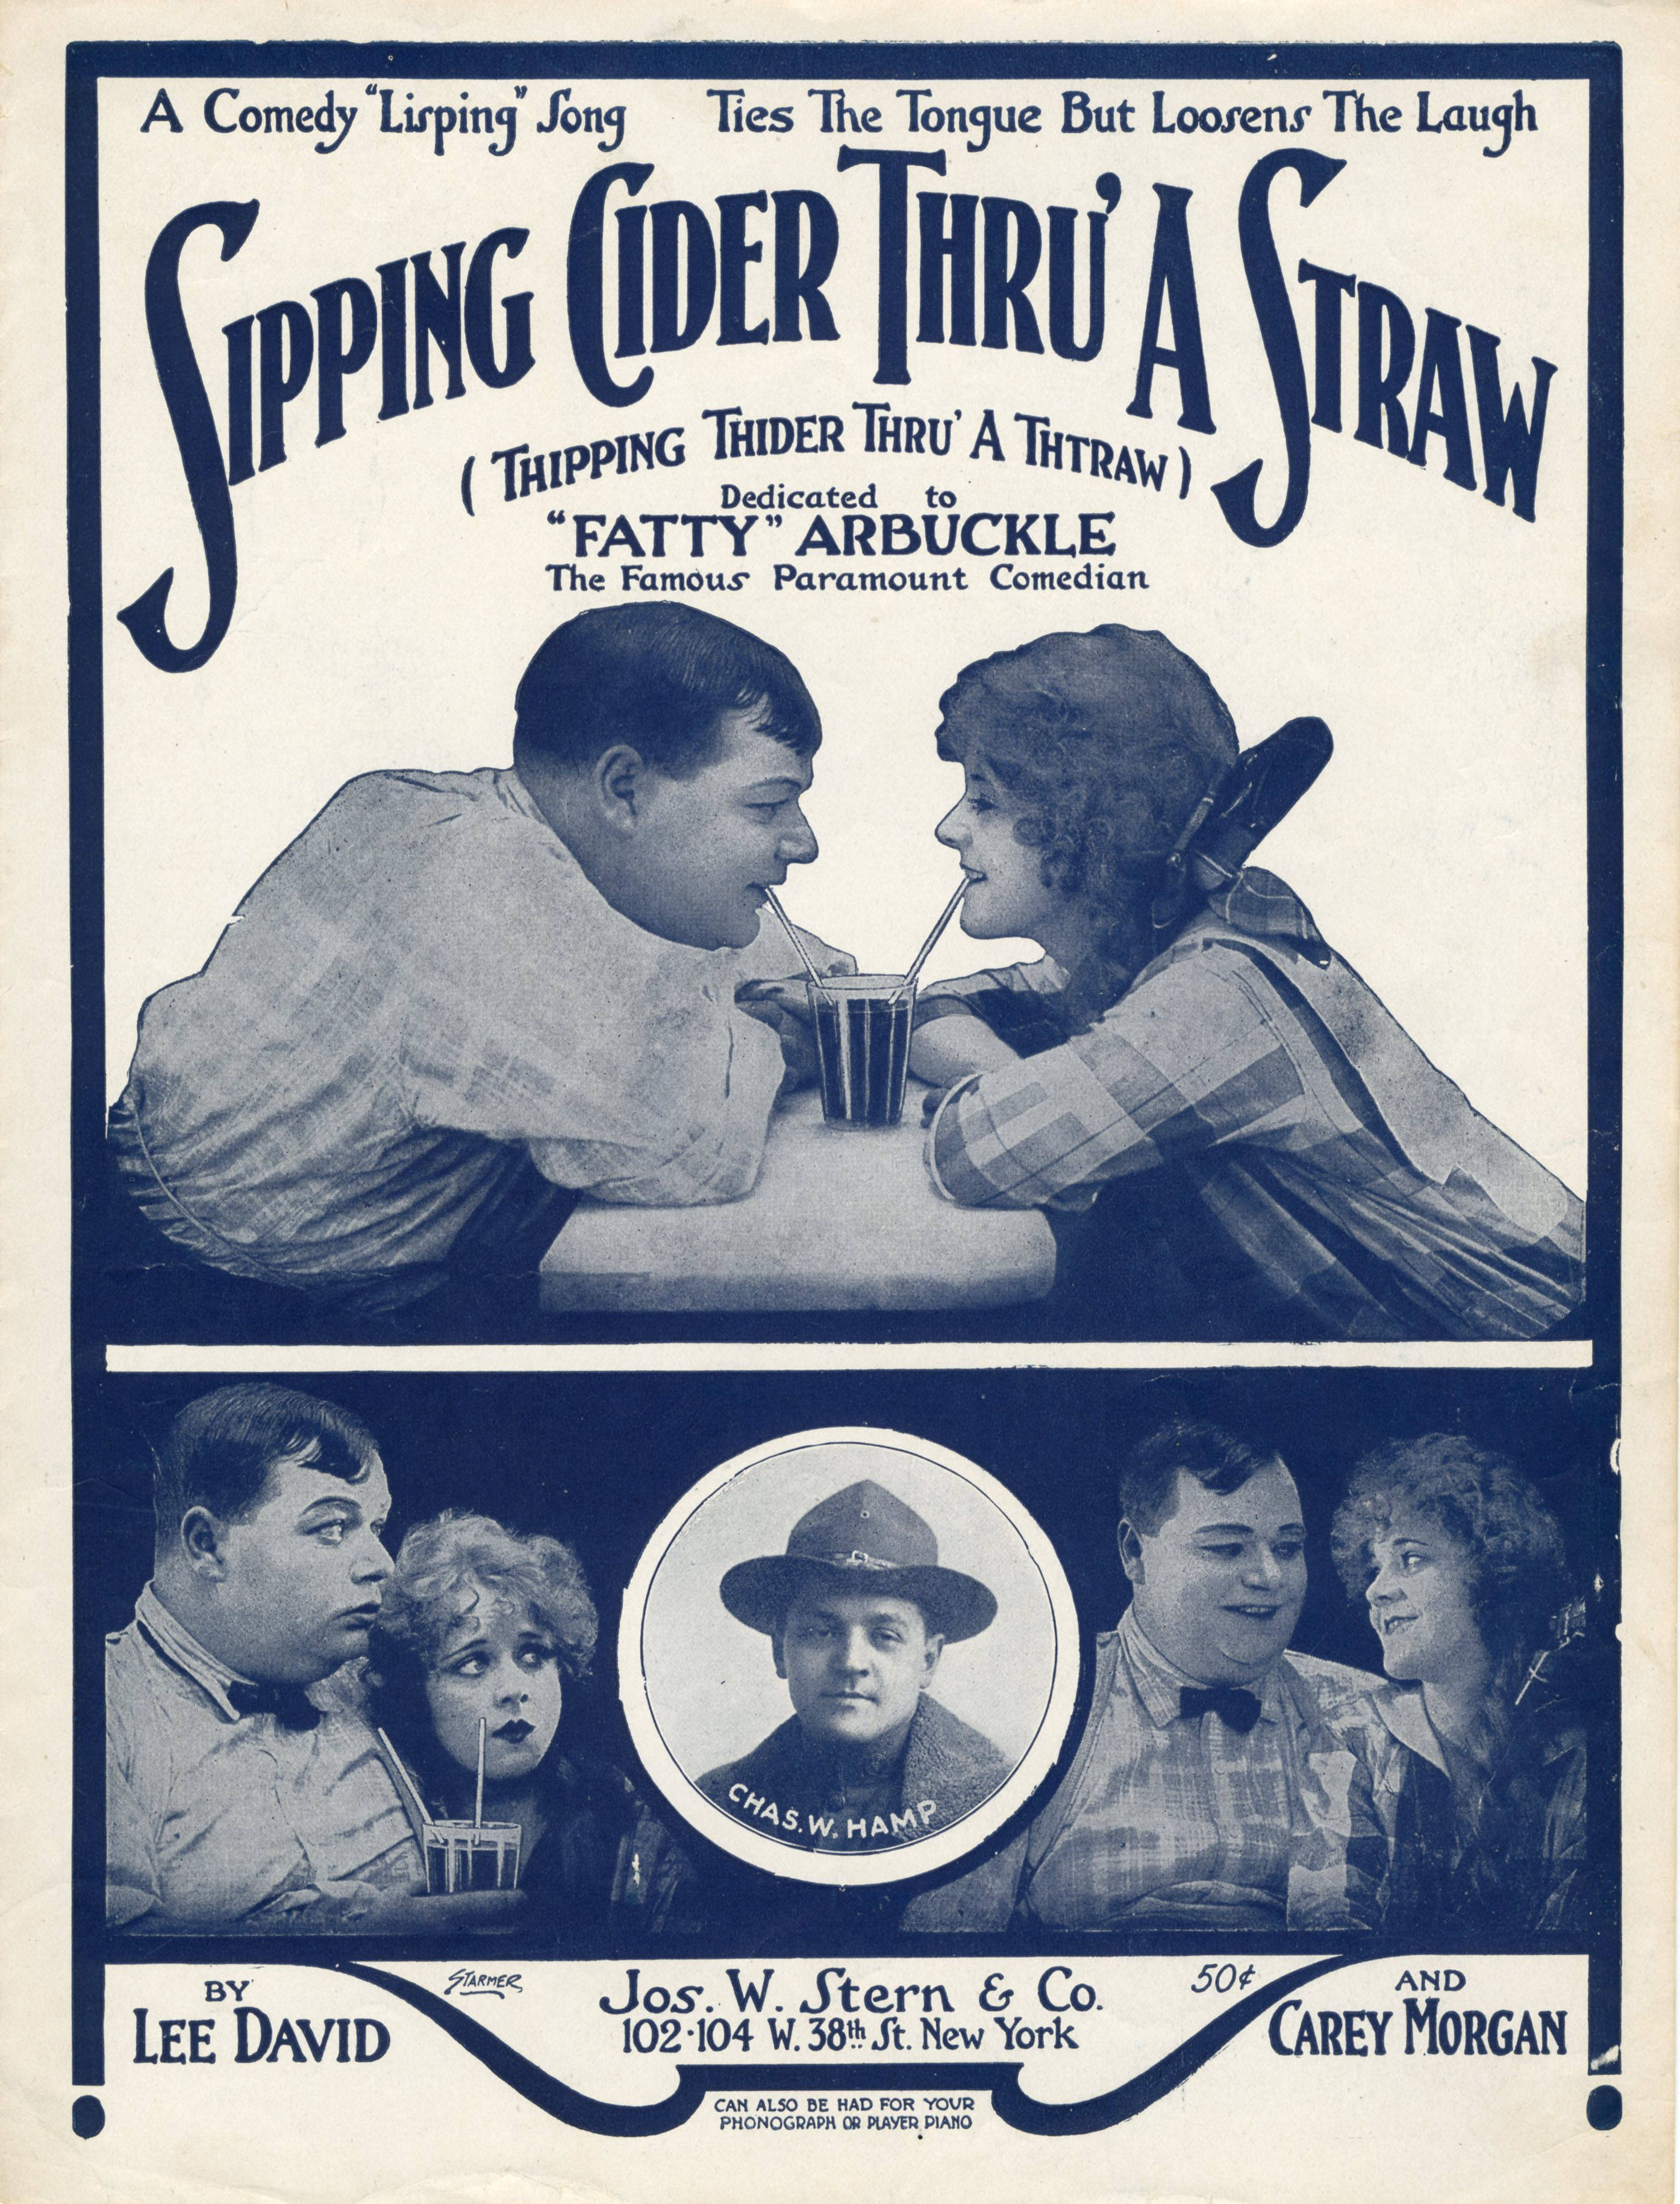 Sheet music cover - SIPPING CIDER THRU' A STRAW = THIPPING THIDER THRU' A THTRAW (1919)